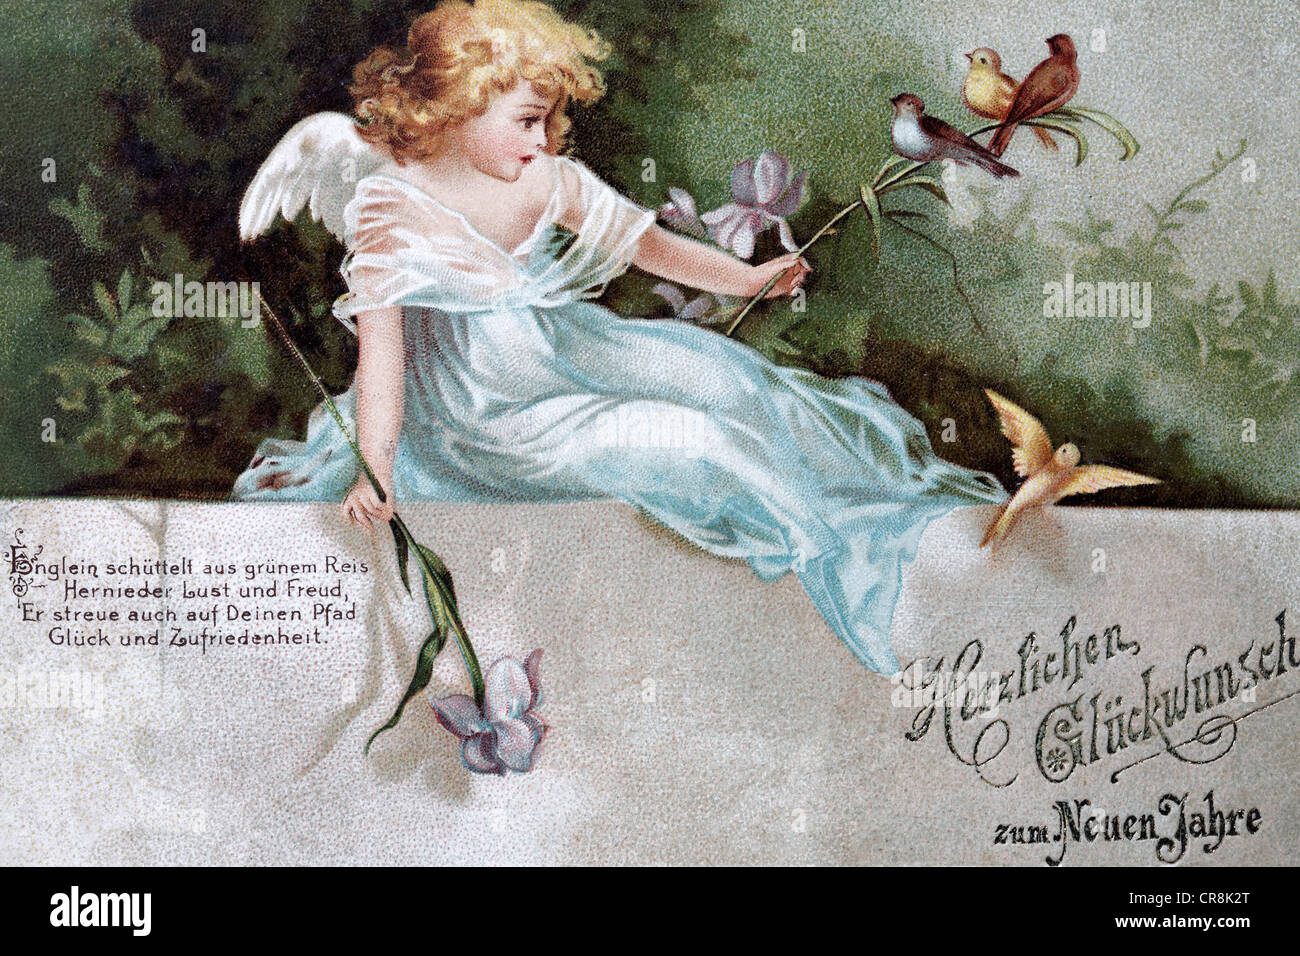 New Year's card with angels and saying, historic postcard, around 1900, kitsch Stock Photo